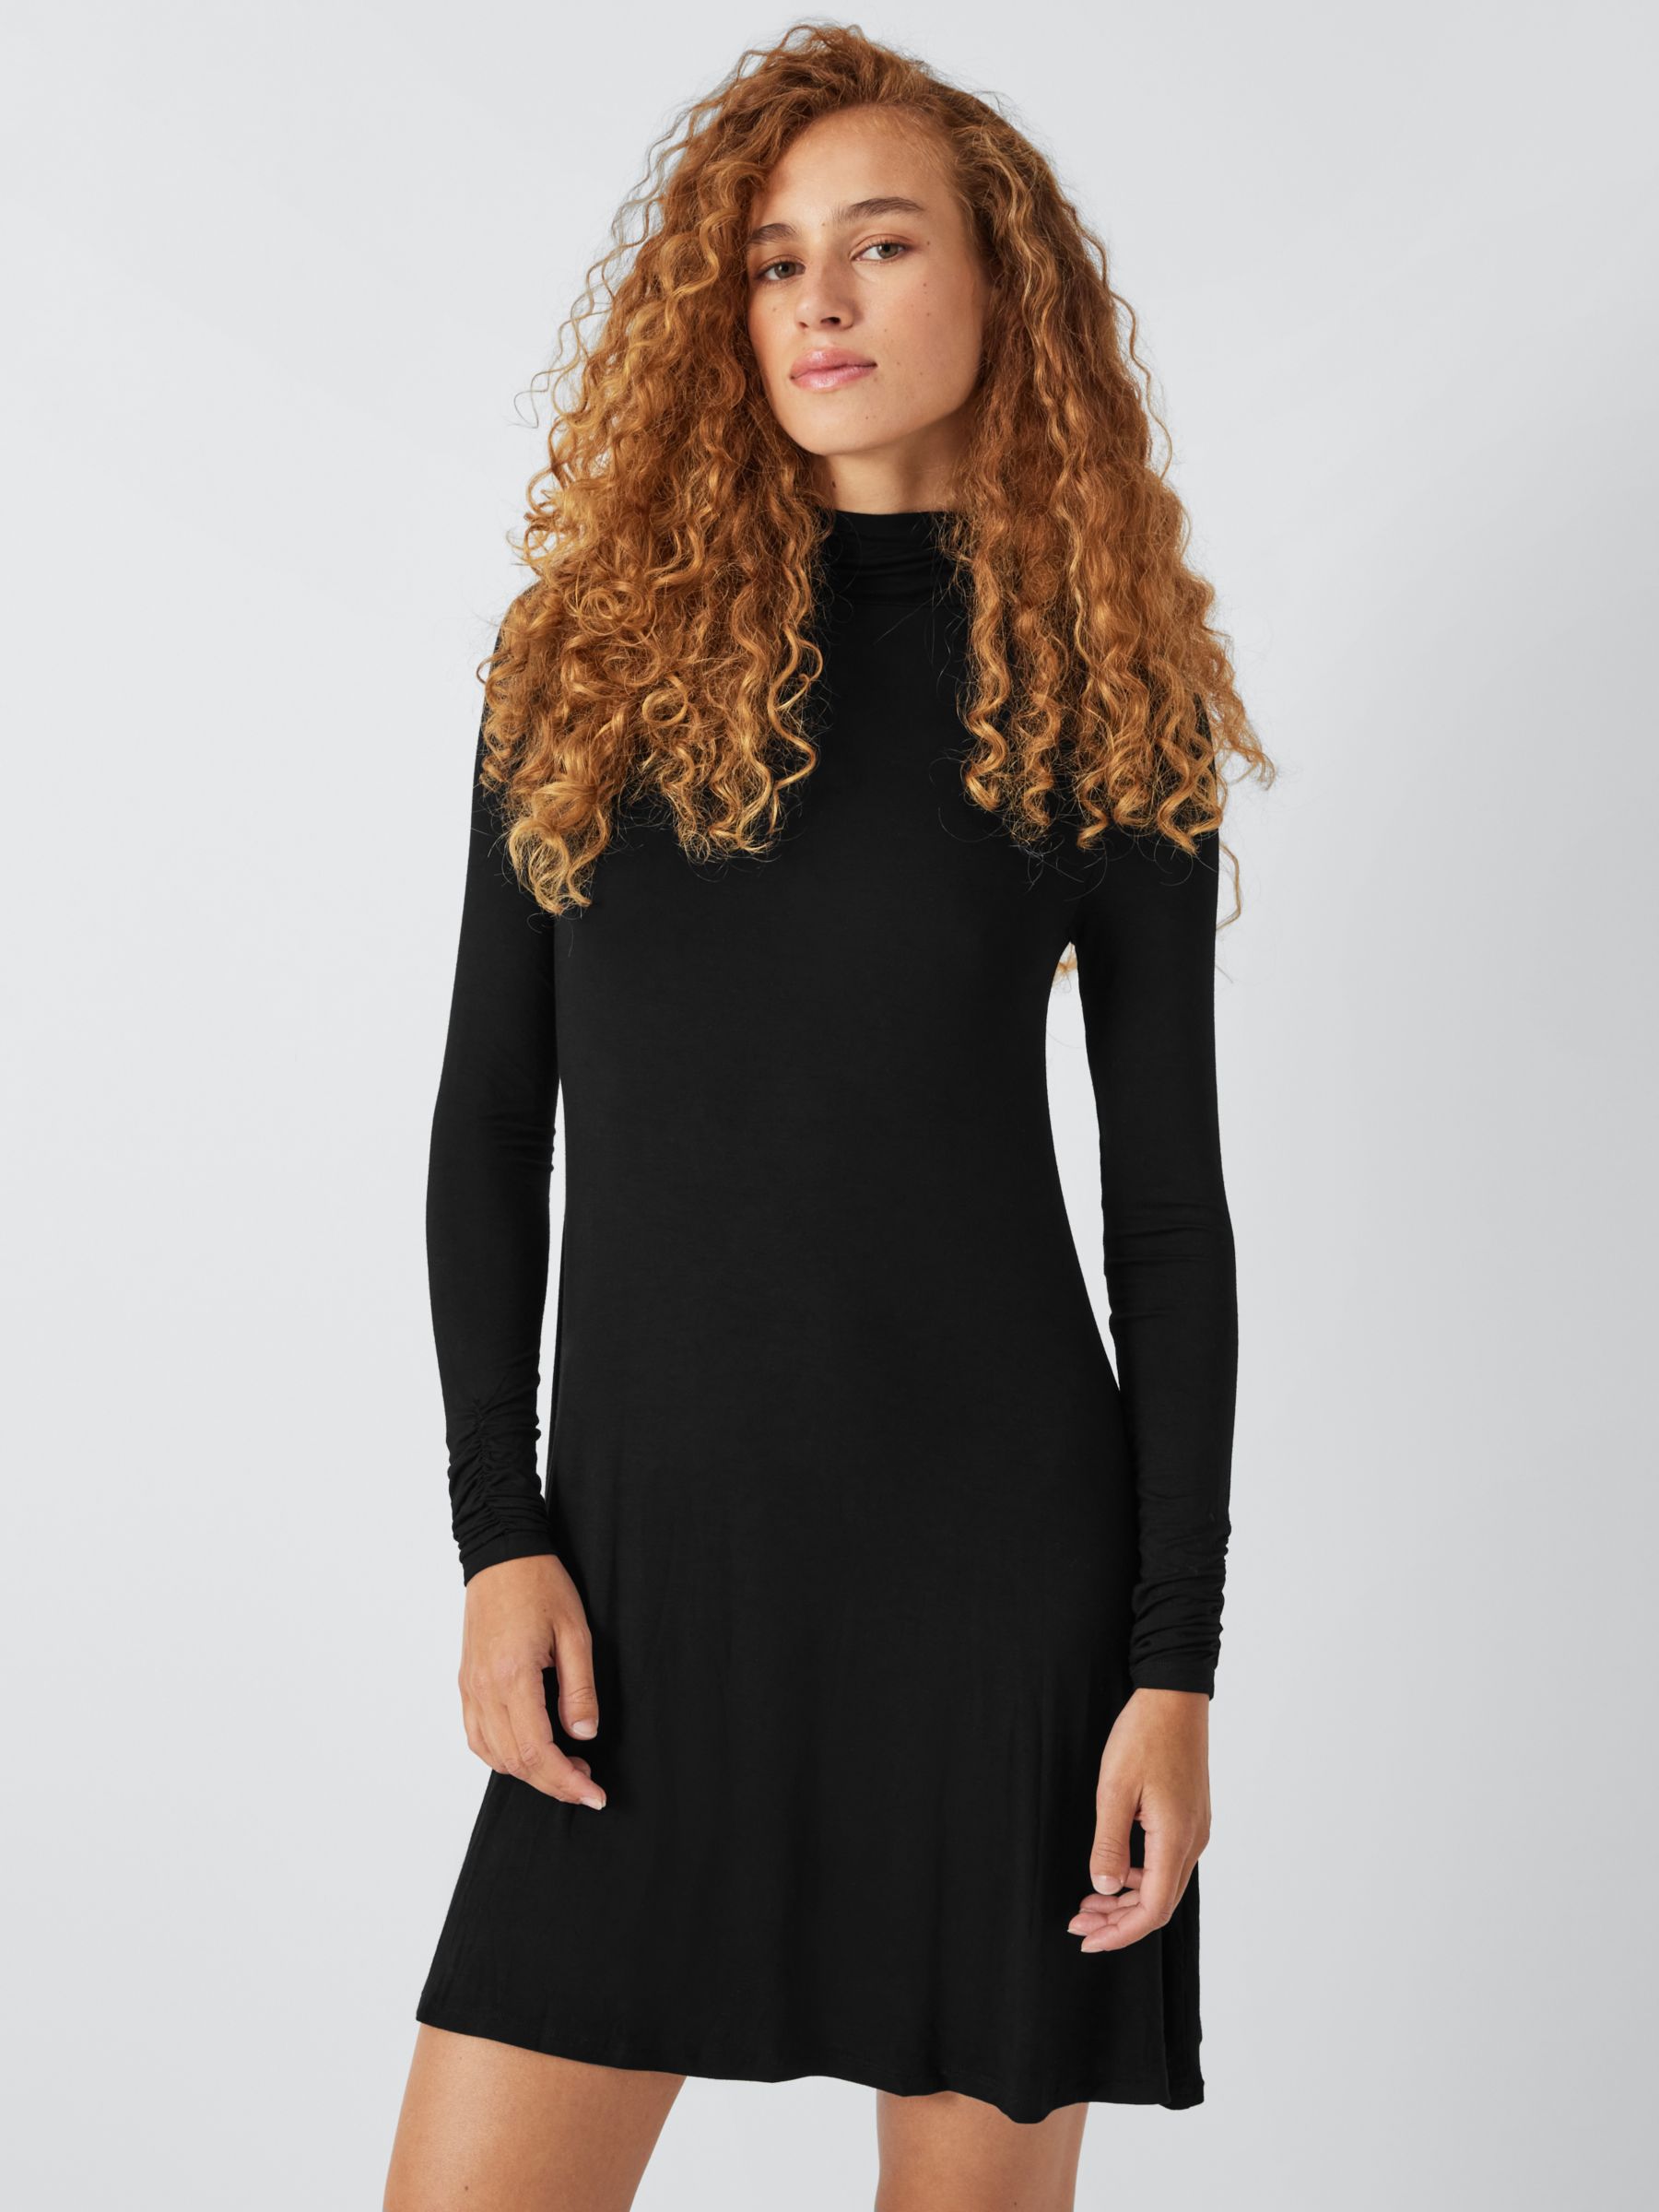 John Lewis ANYDAY Fit & Flare Jersey Dress, Black, M